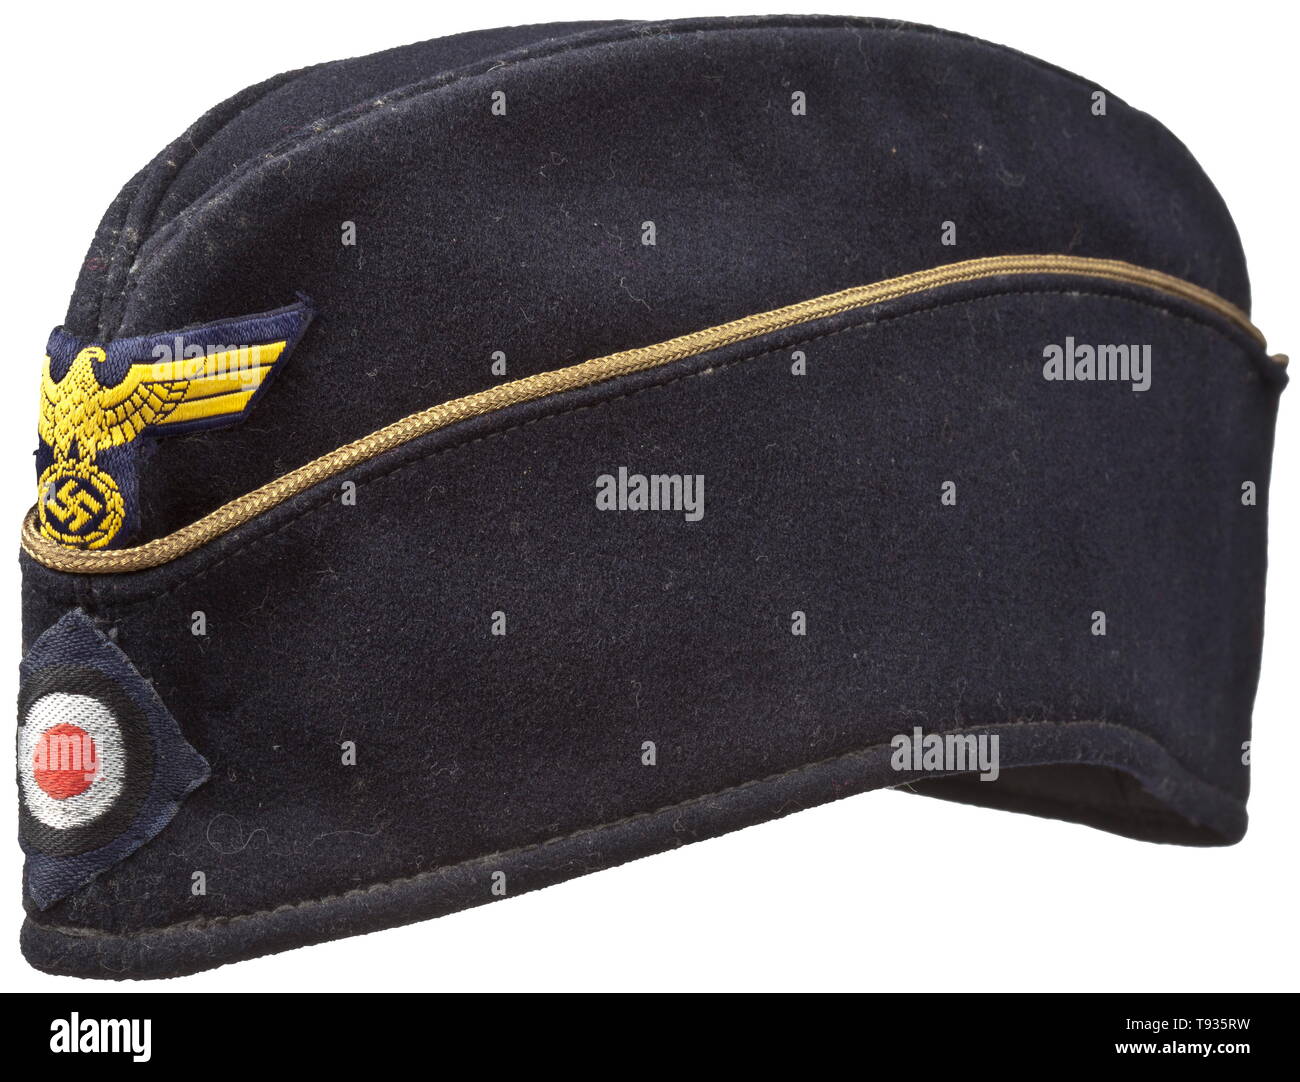 A 'Schiffchen' on-board cap for officers of the Kriegsmarine Depot piece of navy-blue woollen cloth, continuous golden officer's braid, black inner liner, BeVo weave insignia on a dark blue ground. Light signs of usage. historic, historical, navy, naval forces, military, militaria, branch of service, branches of service, armed forces, armed service, object, objects, stills, clipping, clippings, cut out, cut-out, cut-outs, 20th century, Editorial-Use-Only Stock Photo